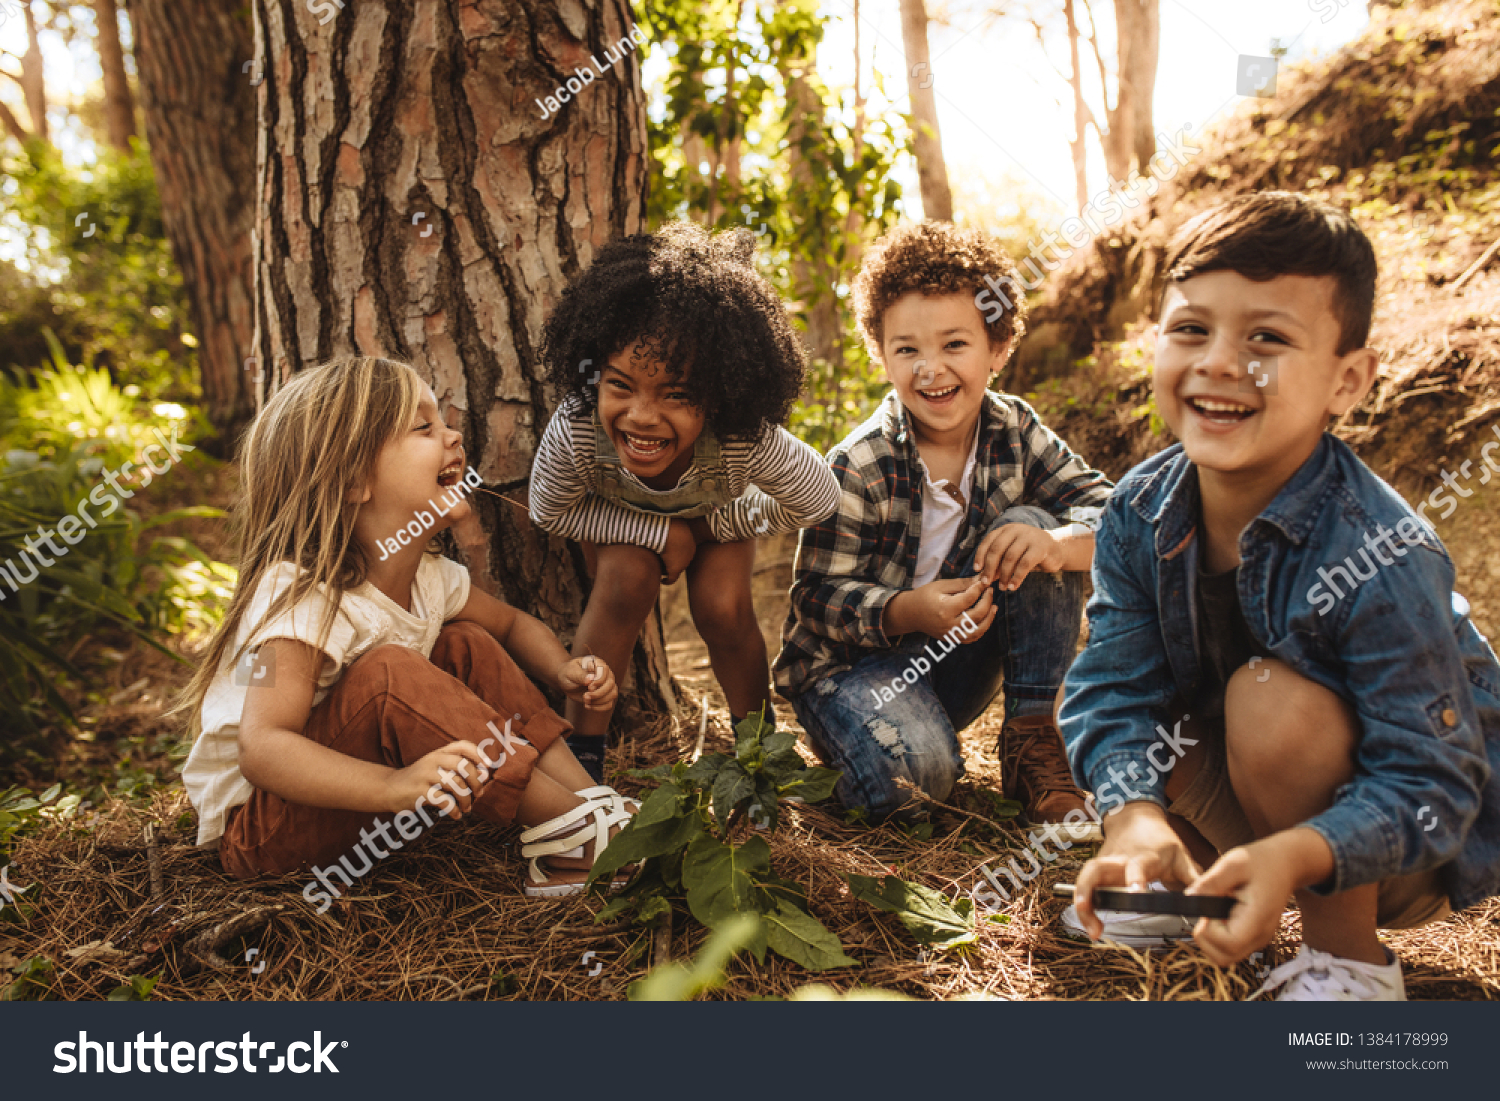 Group of cute kids sitting together in forest and looking at camera. Cute children playing in woods. #1384178999